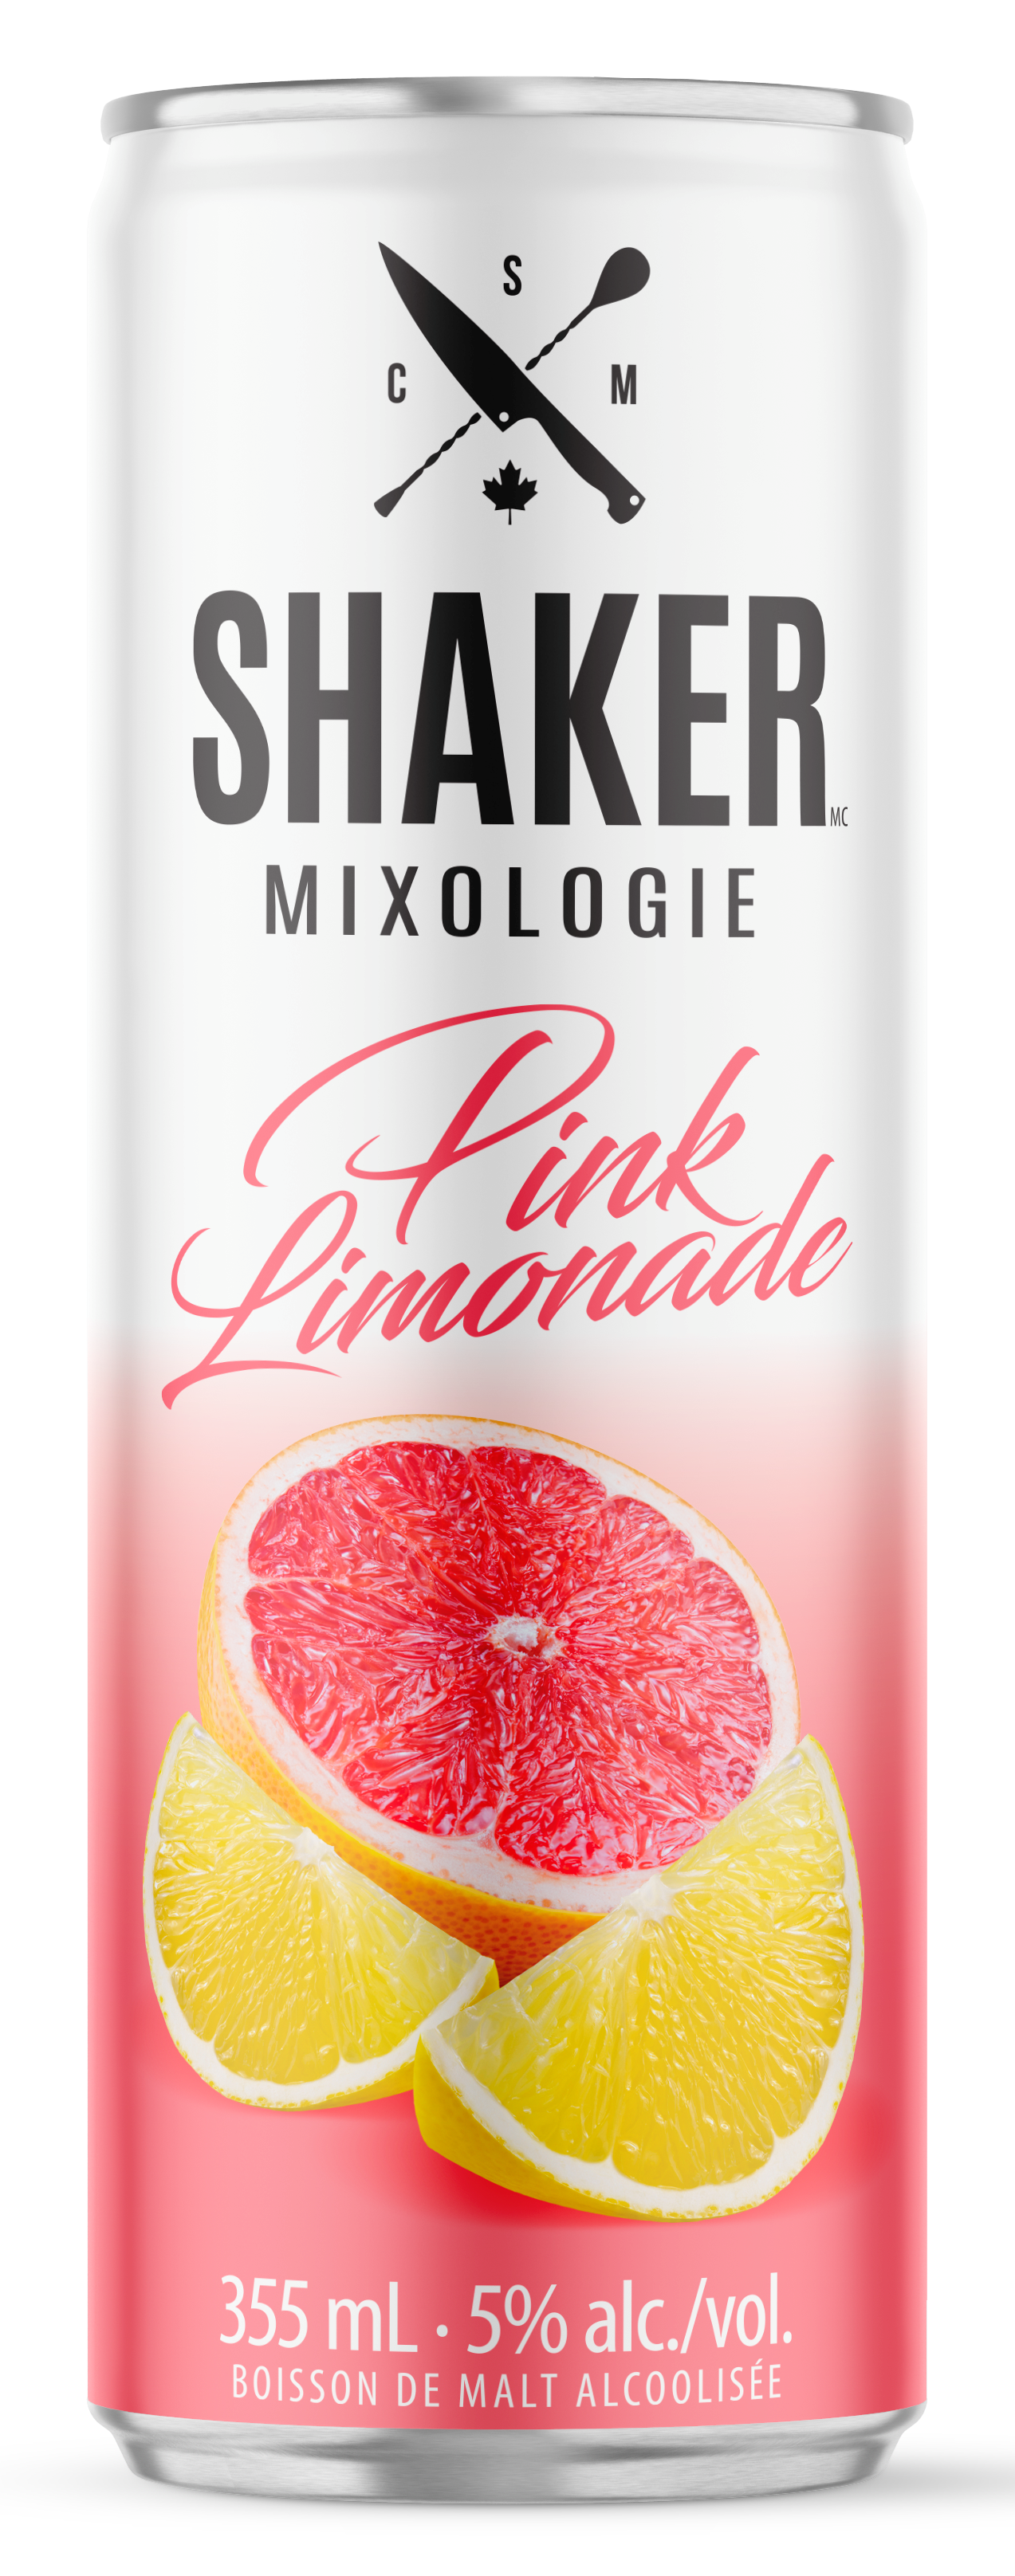 can pink limonade